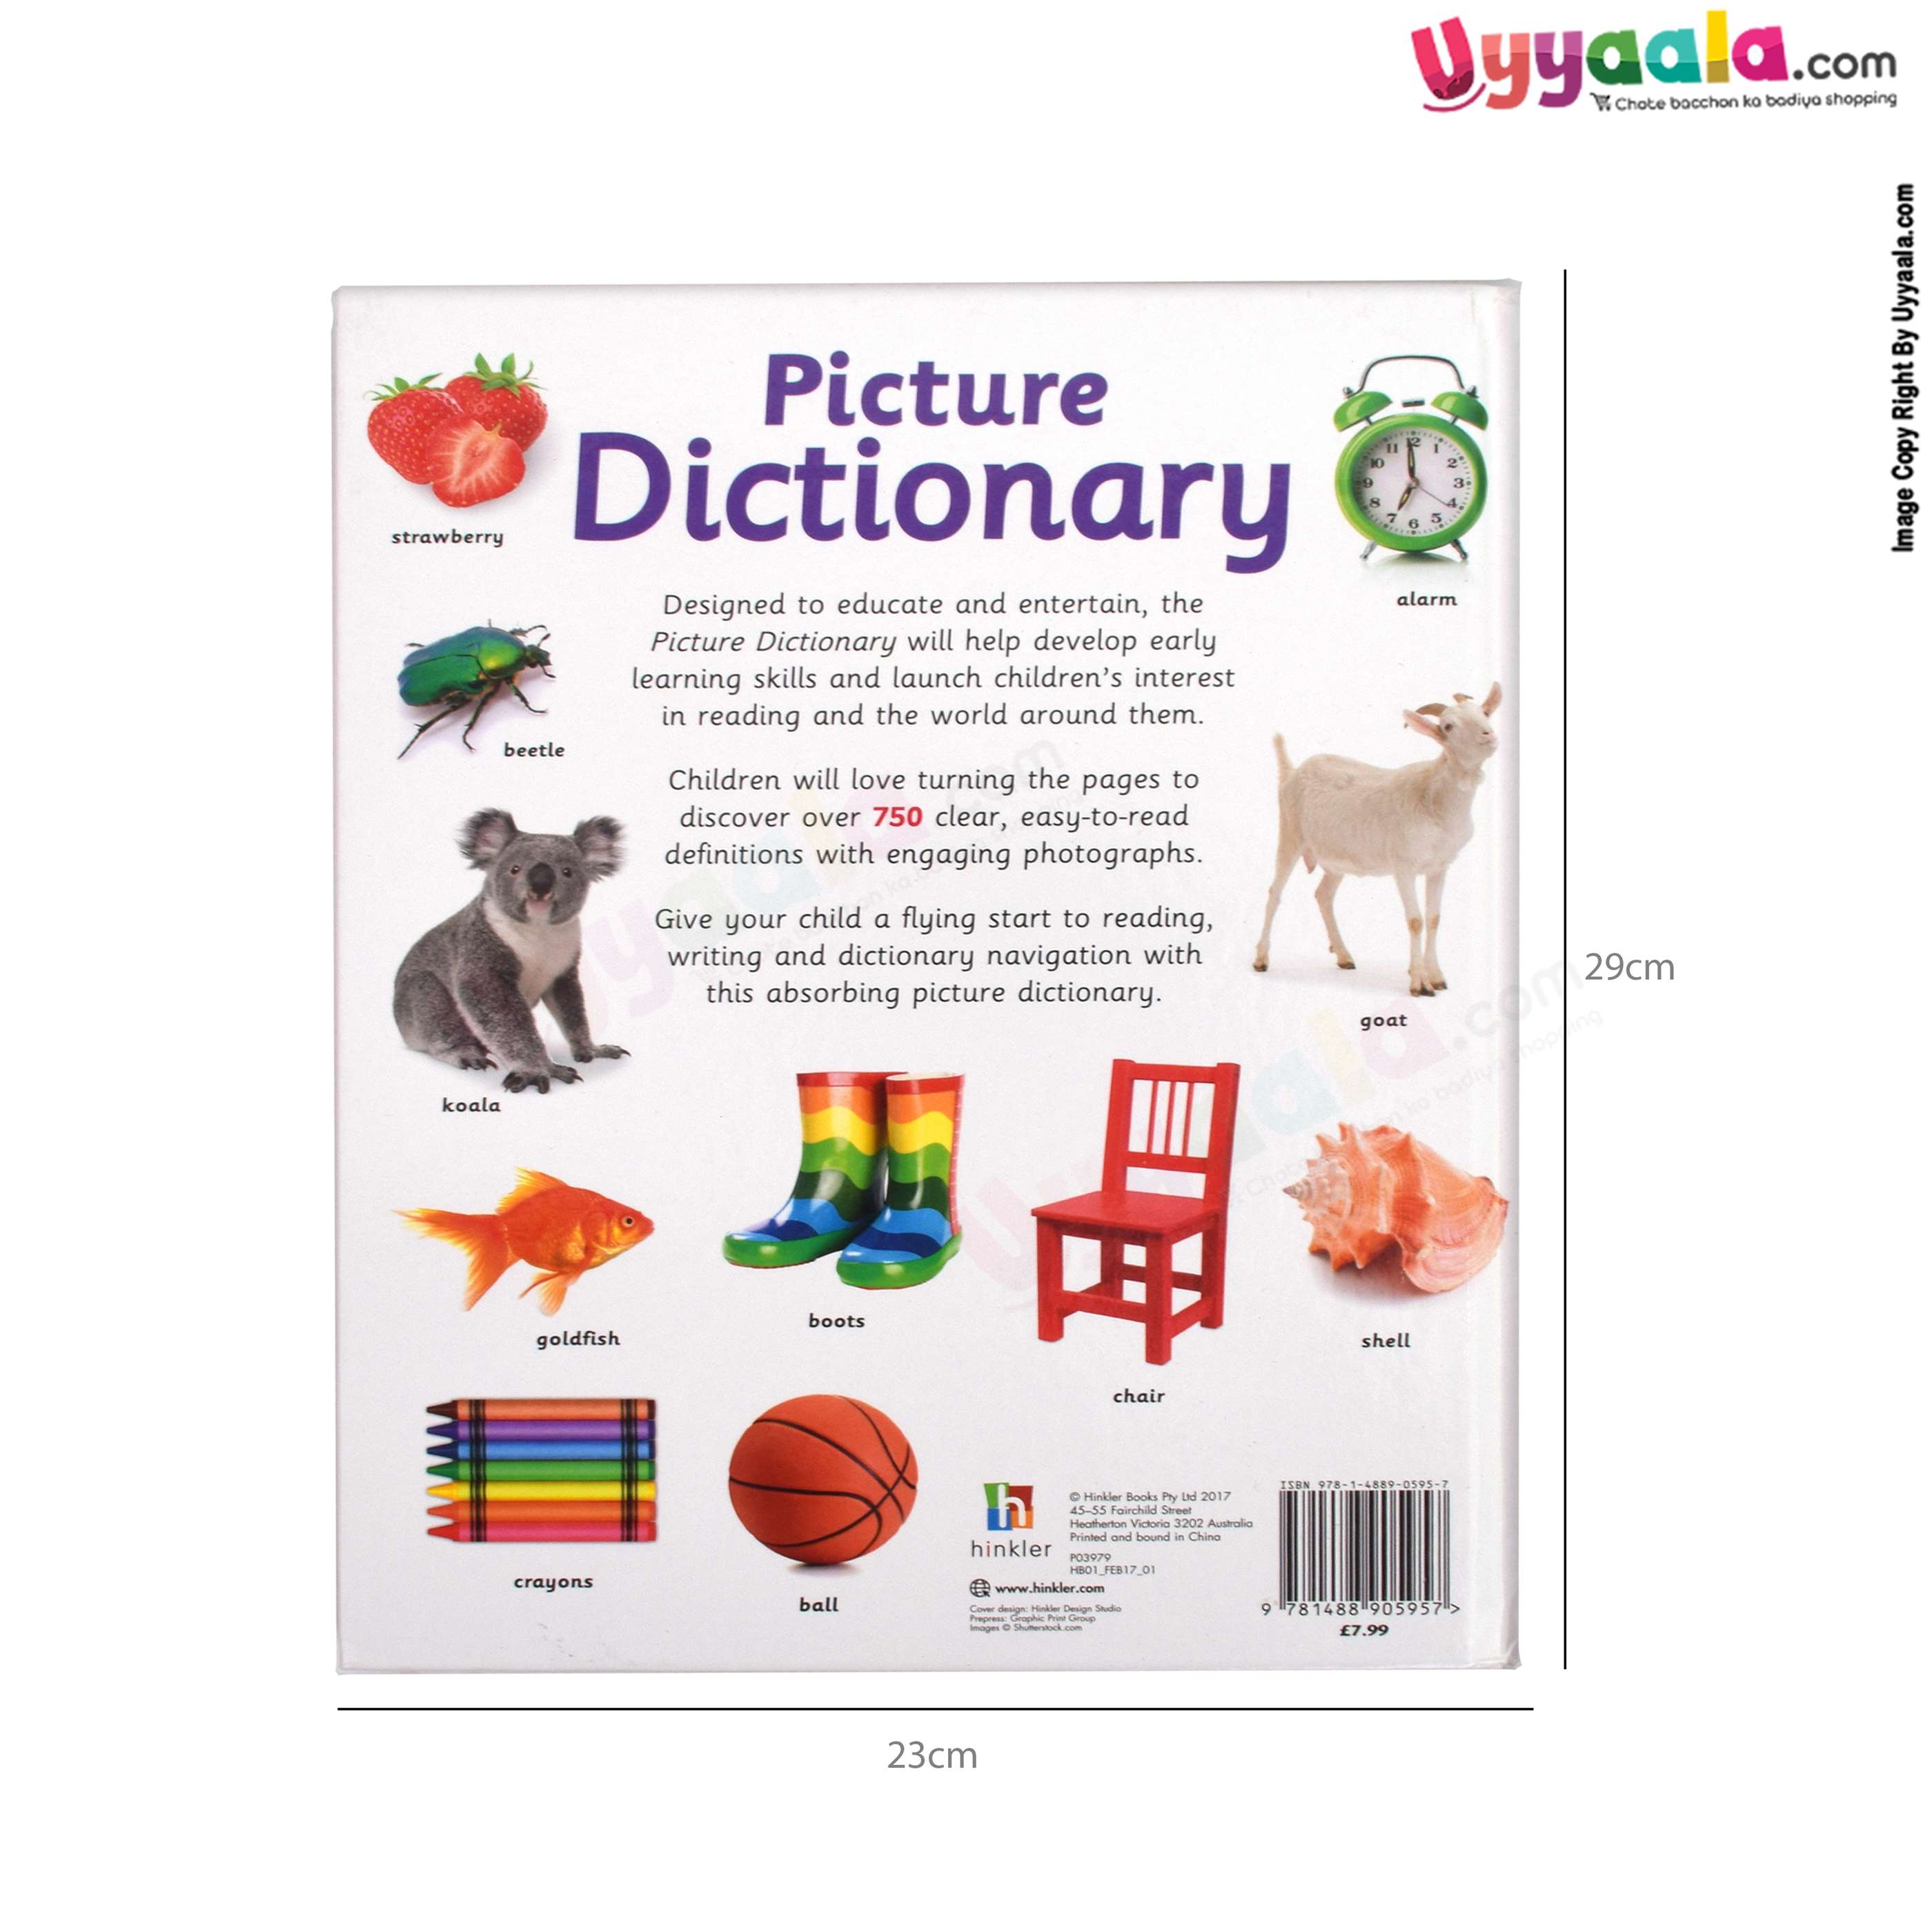 HINKLER Flying start, picture dictionary - over 750 words, pictures & definitions, 3 - 6 years